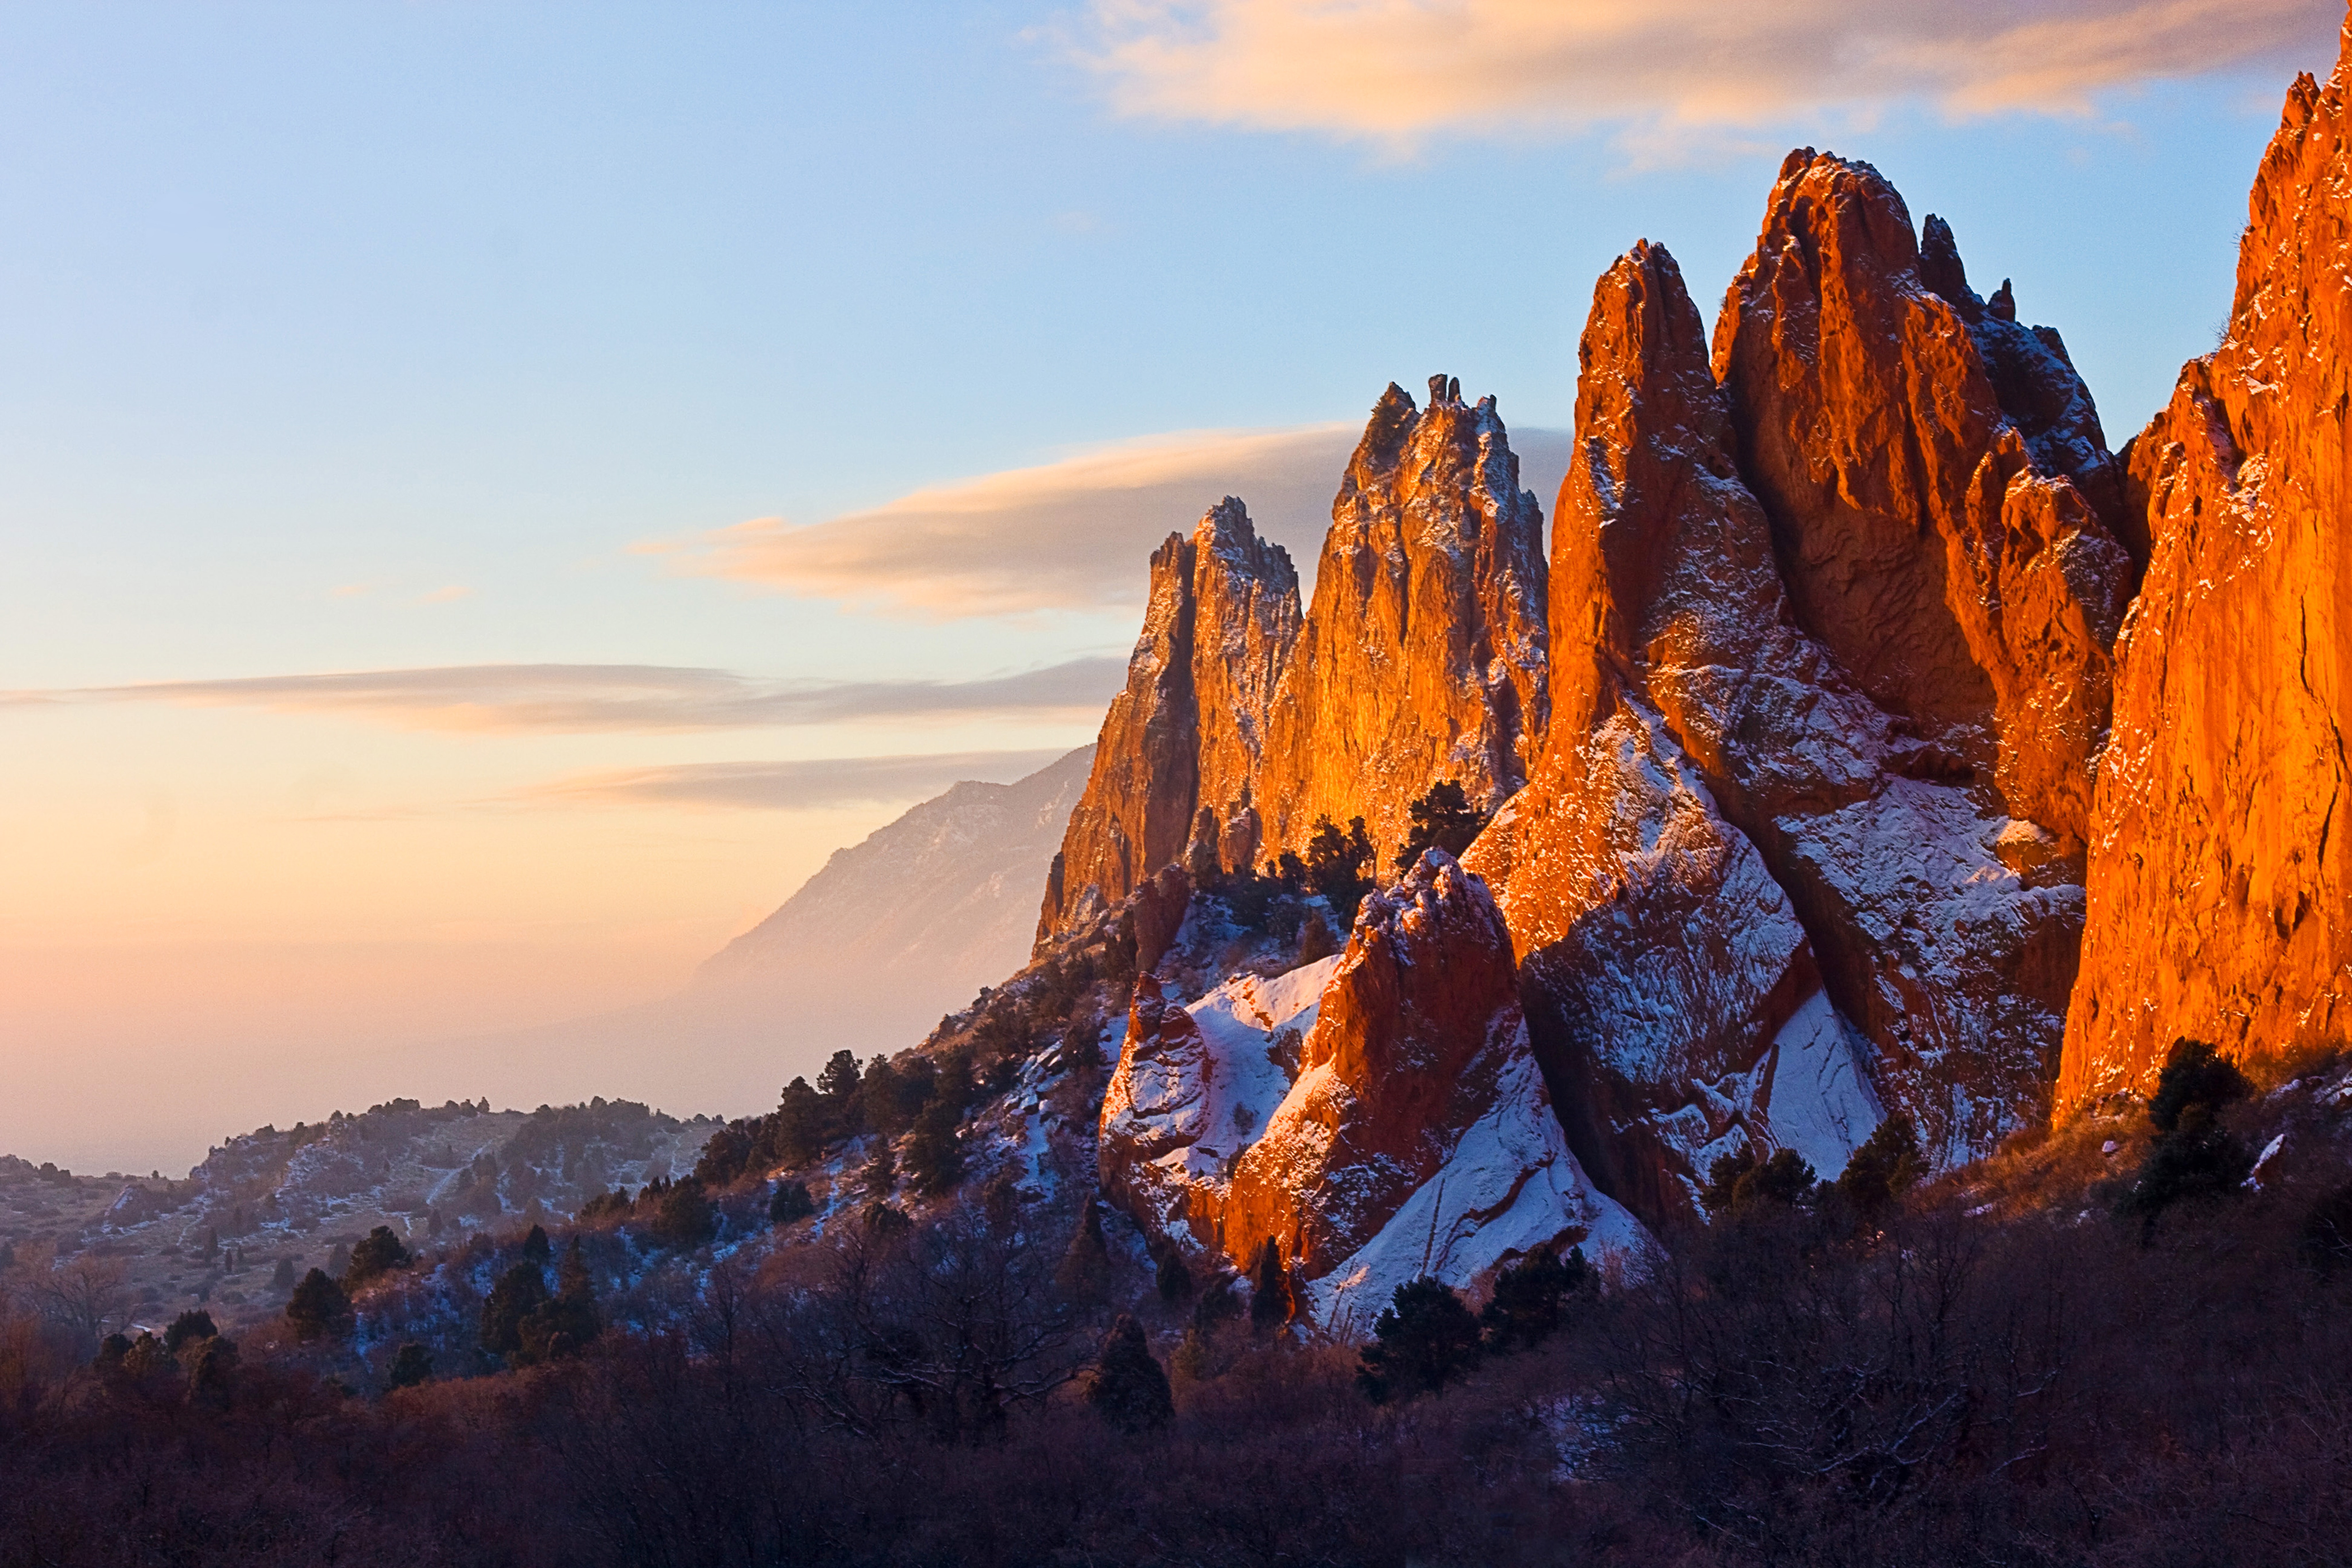 A dusting of snow covers several red rock pointed rocky peaks that rise above a hilly landscape